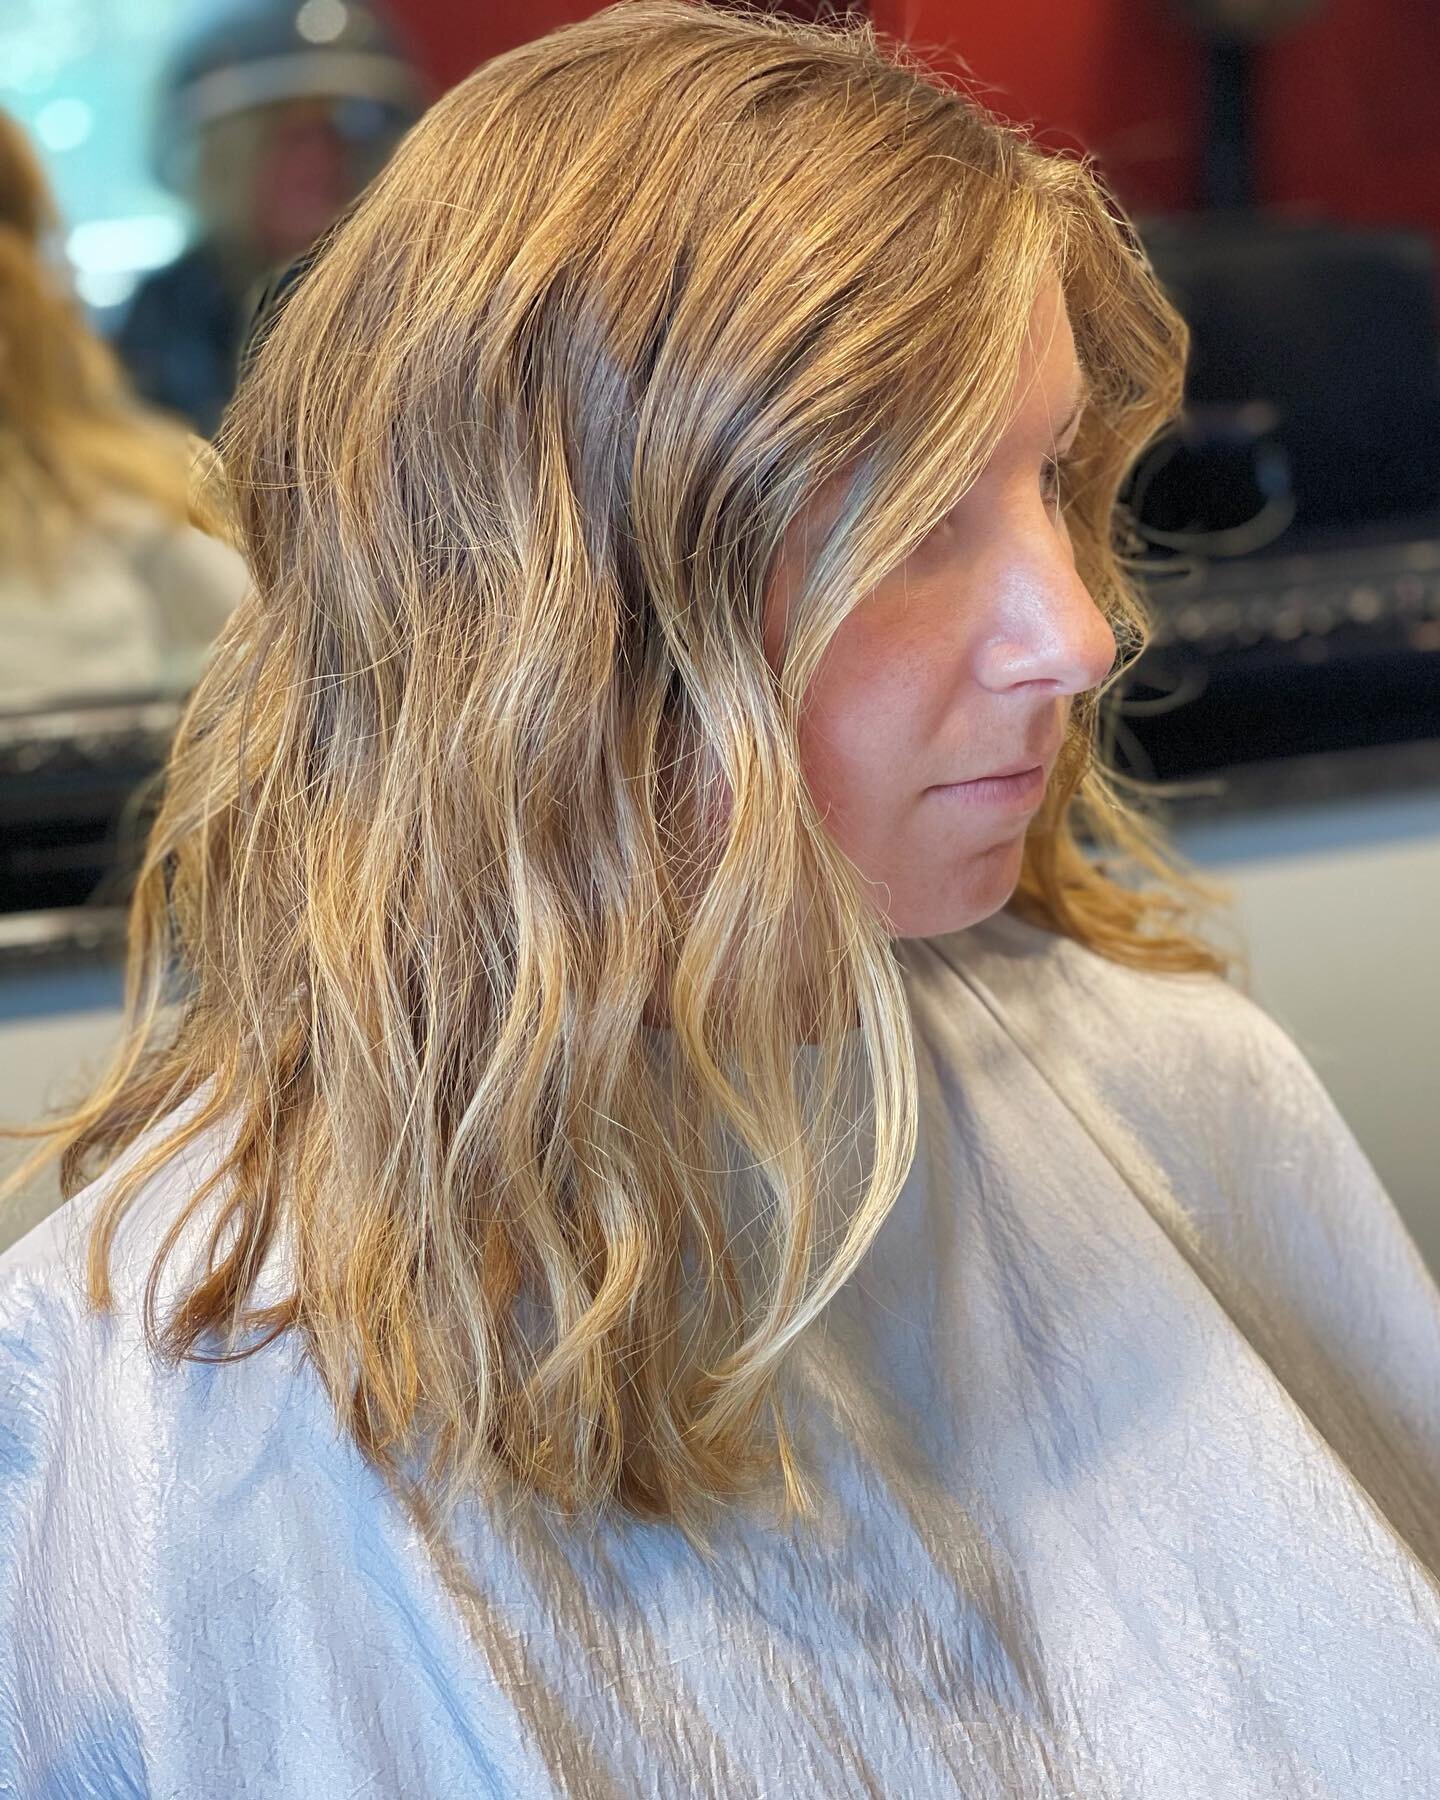 Highlights fix everything💫 swipe for the before 

done by @amanda_nesspor !

#highlights #hairsalon #smallbusiness #phoenixville #pa #blonde #haircut #balyage